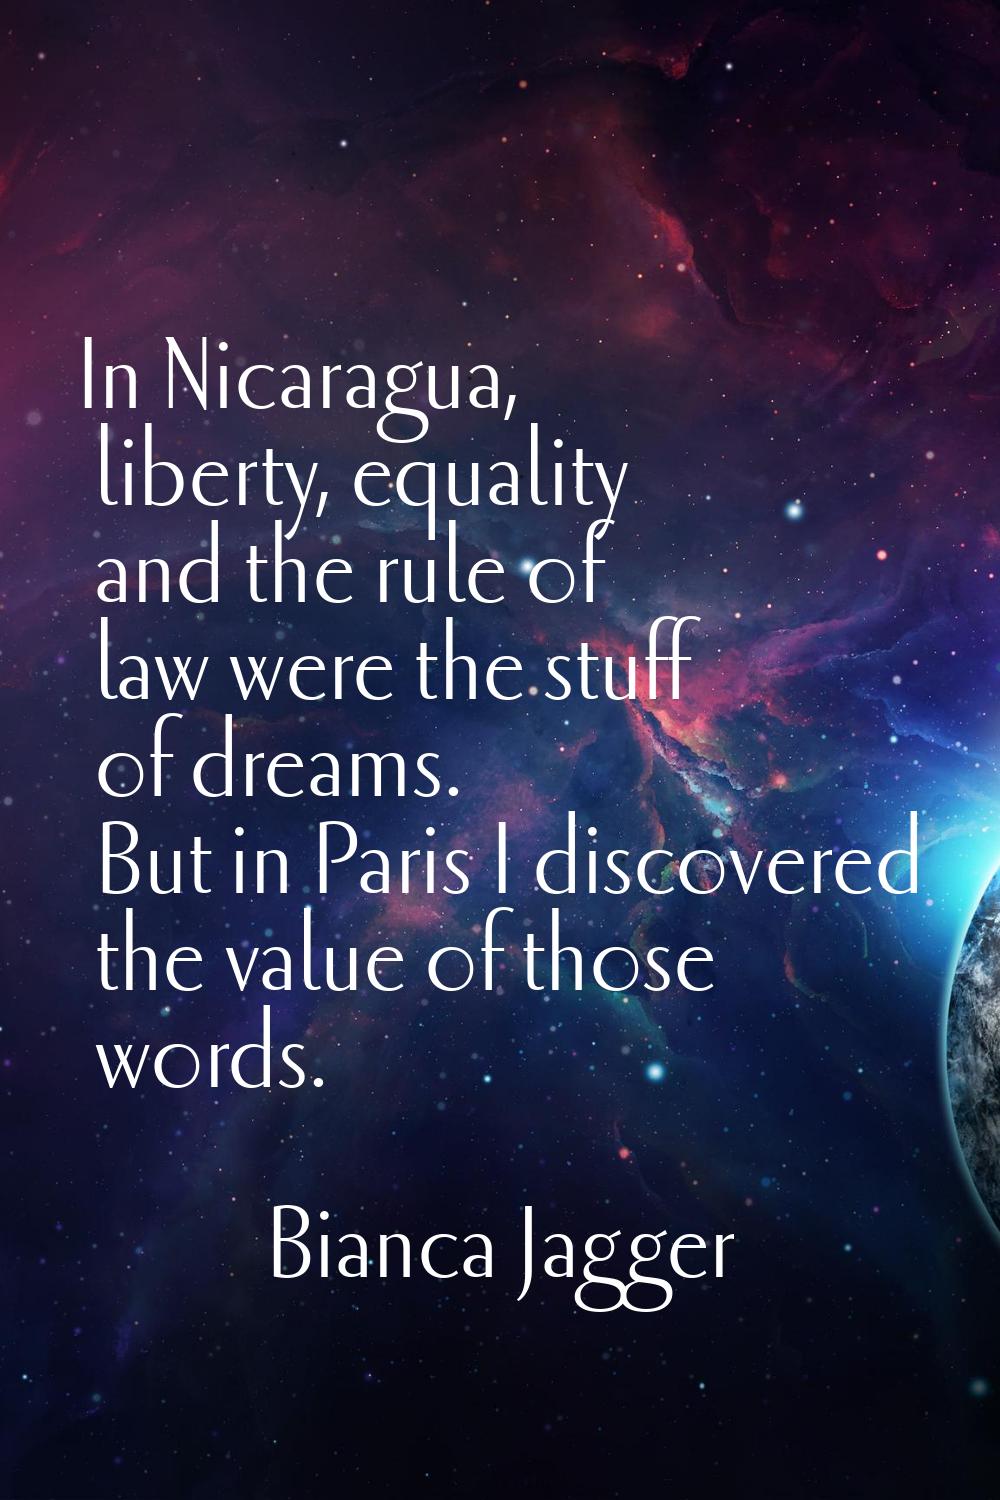 In Nicaragua, liberty, equality and the rule of law were the stuff of dreams. But in Paris I discov